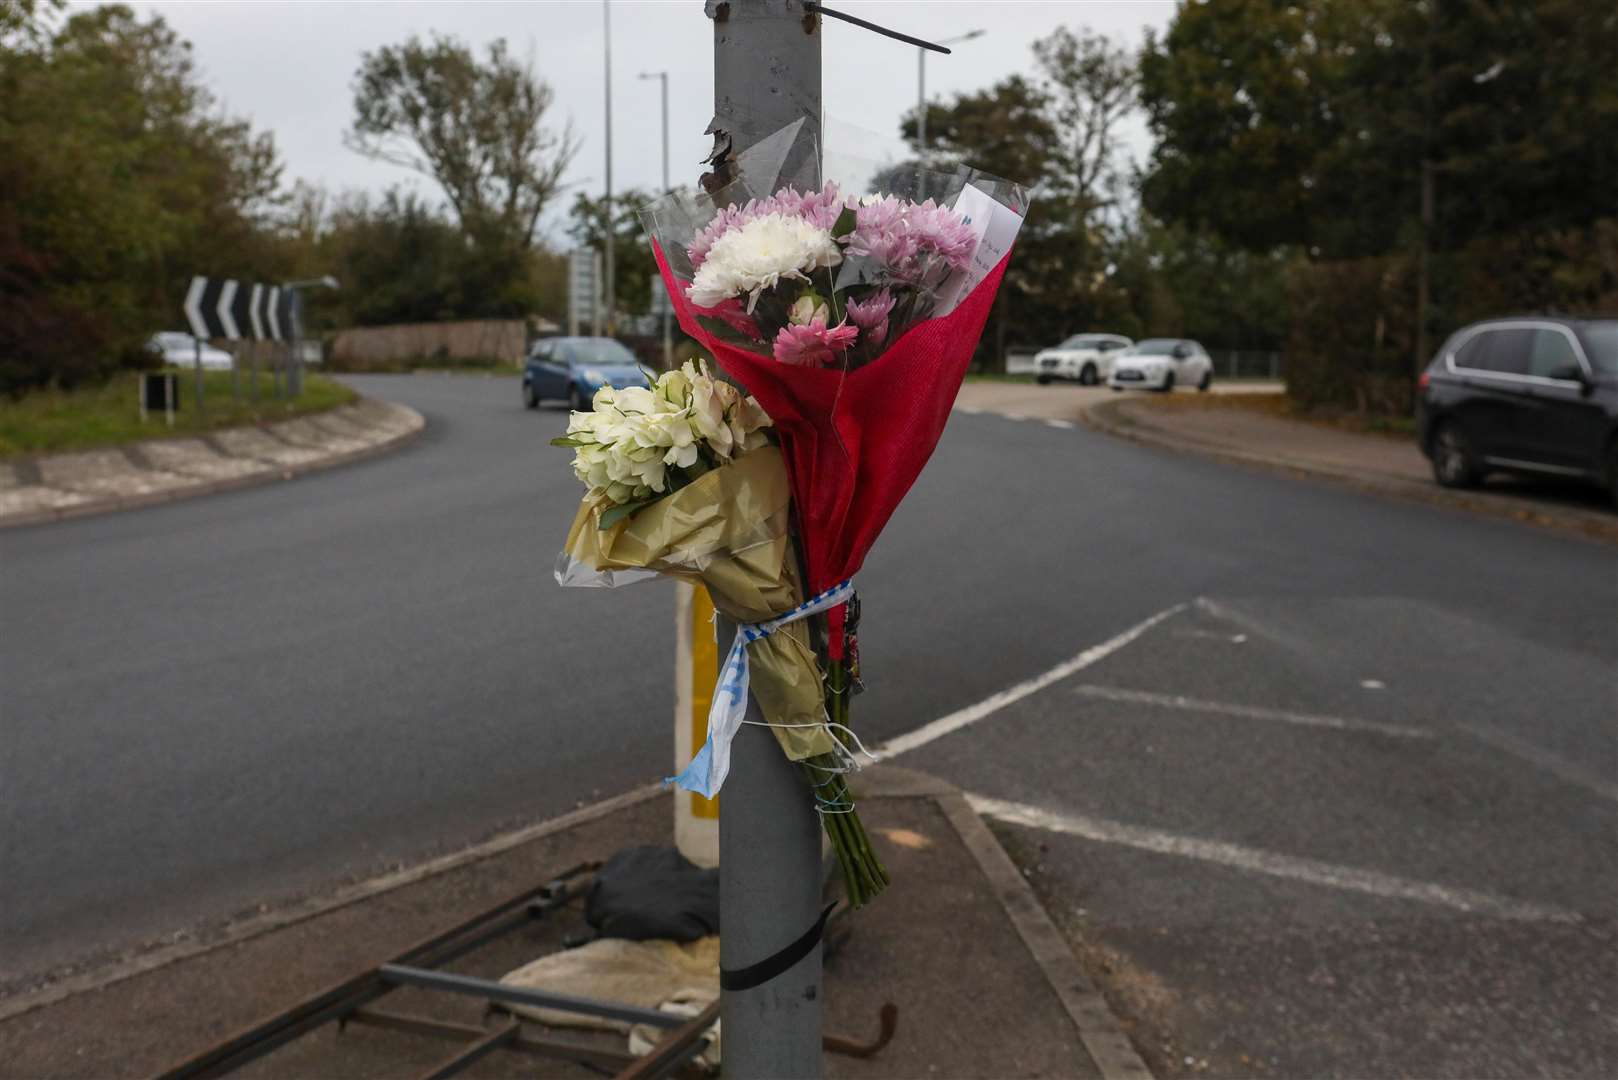 Tributes have been left at the scene of the fatal accident. Picture: UKNIP